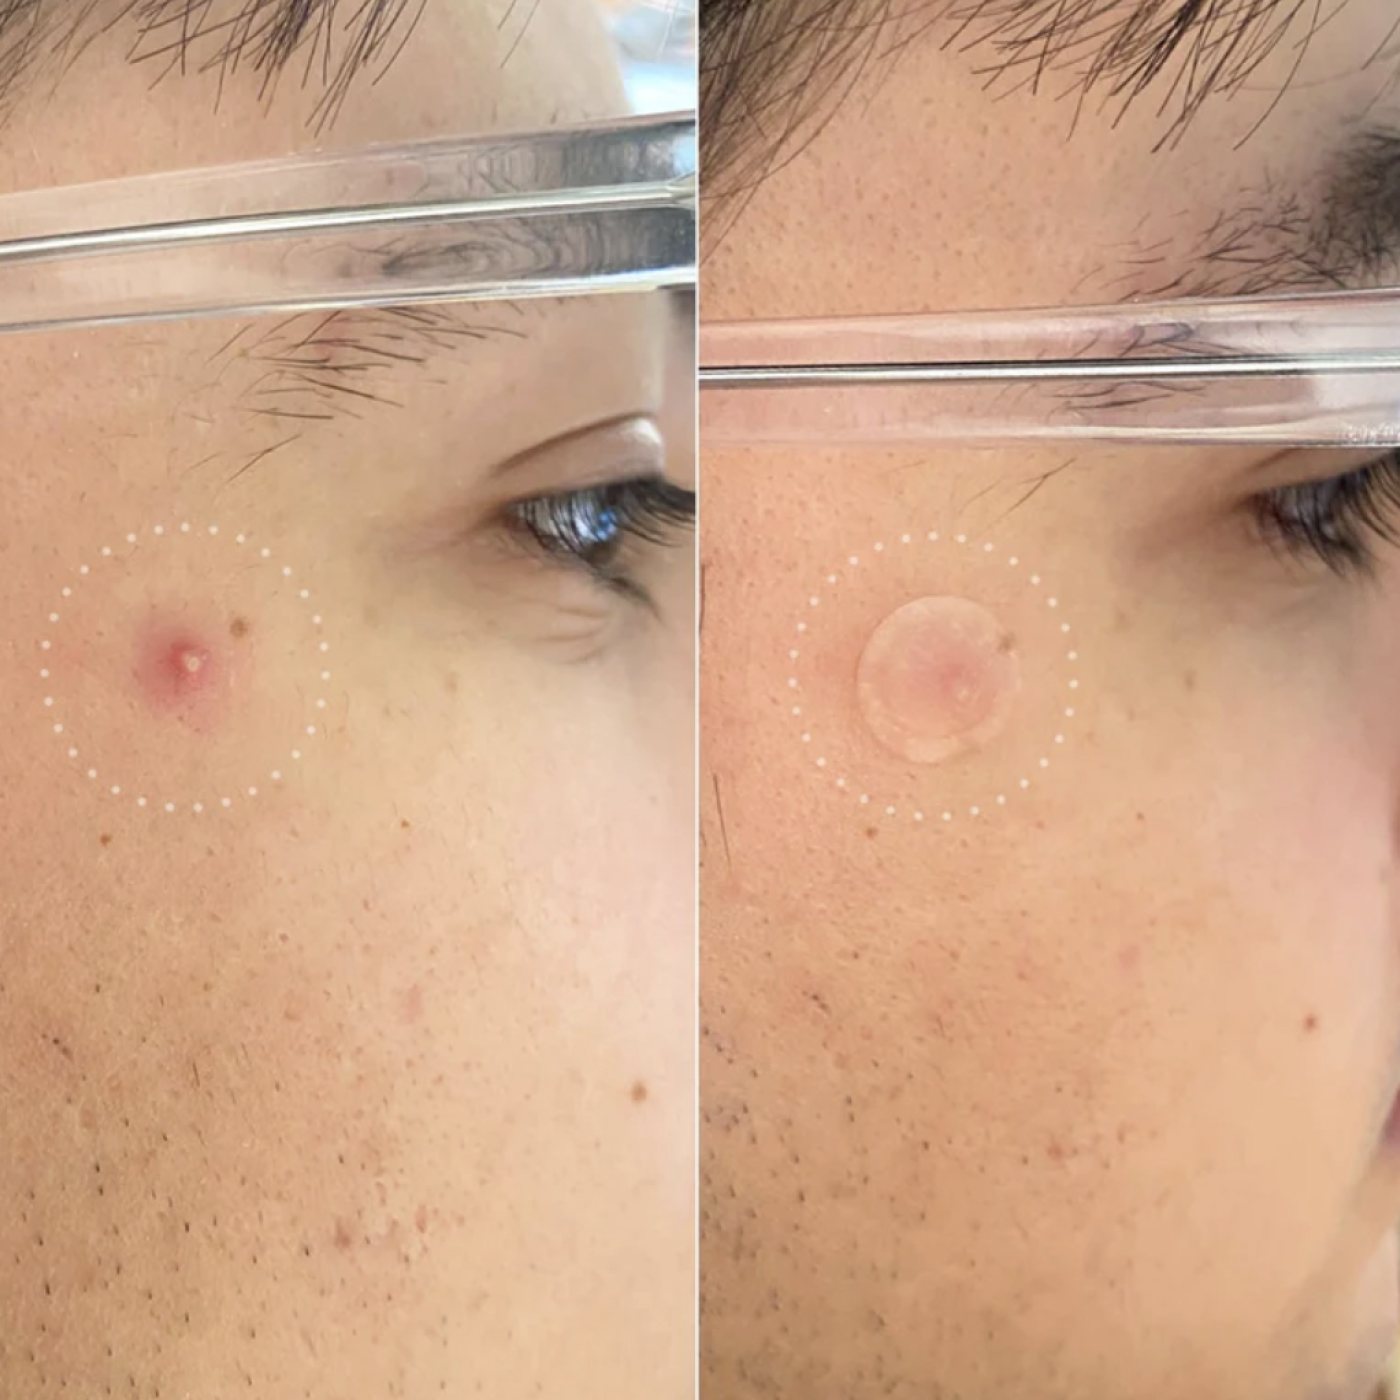 Mighty Patch Invisible+, The Ultra-Thin Acne Patch